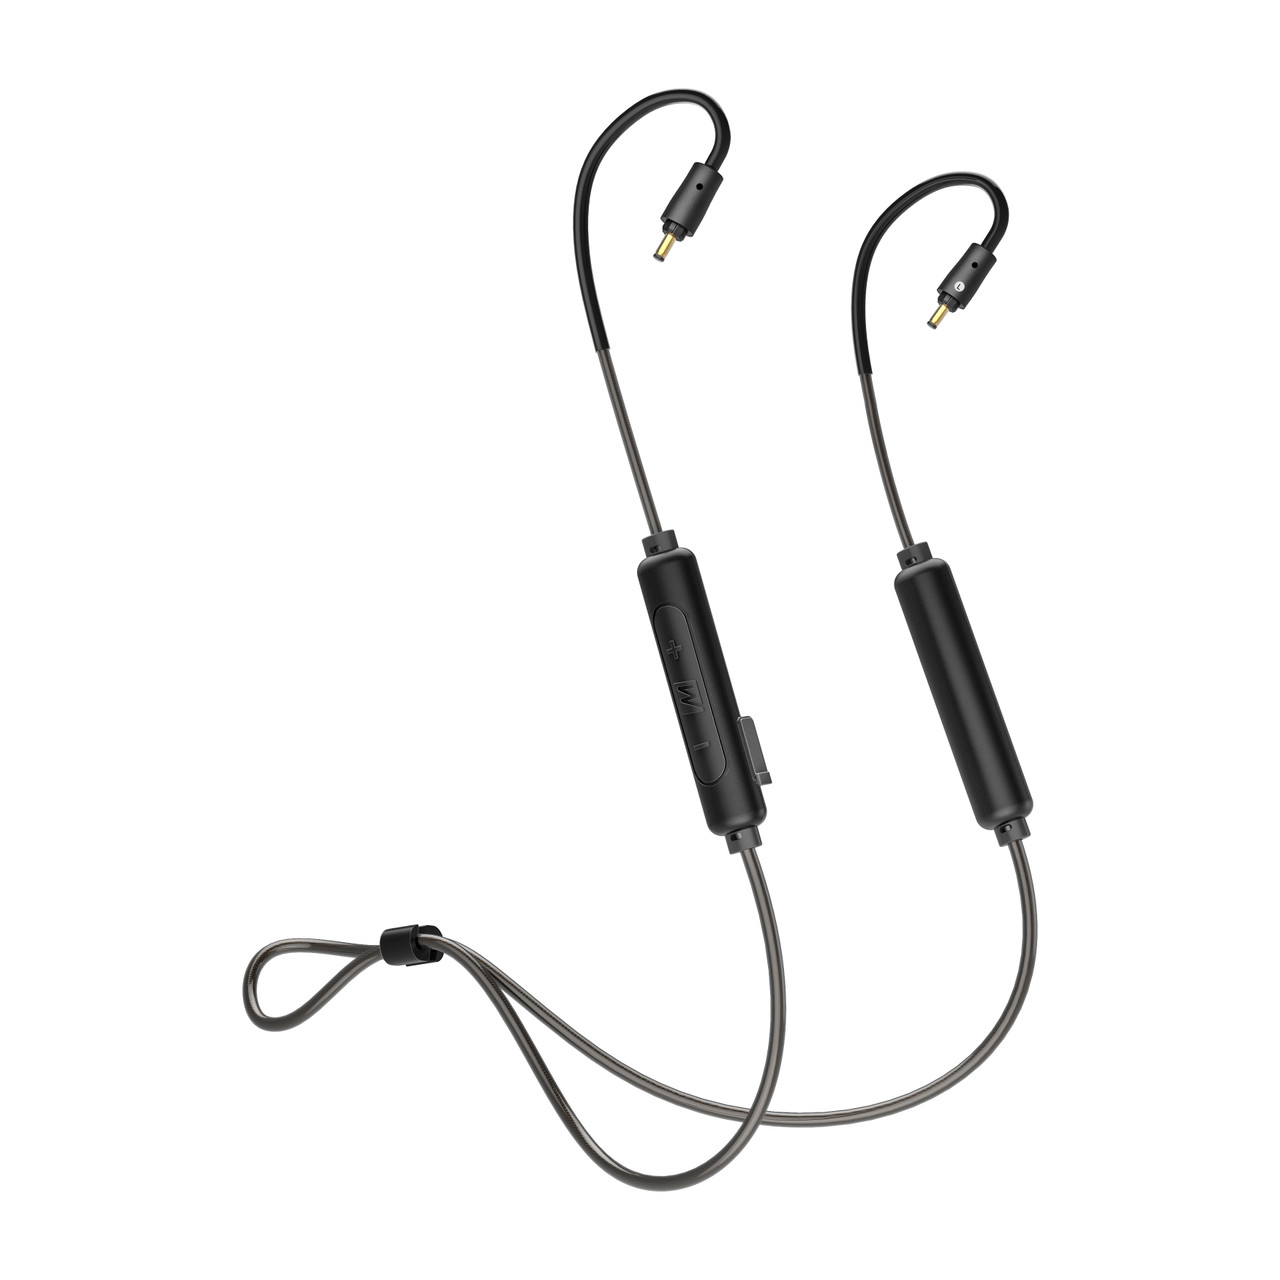 BTC2 Bluetooth Adapter Cable for MX PRO and M6 PRO IEMs